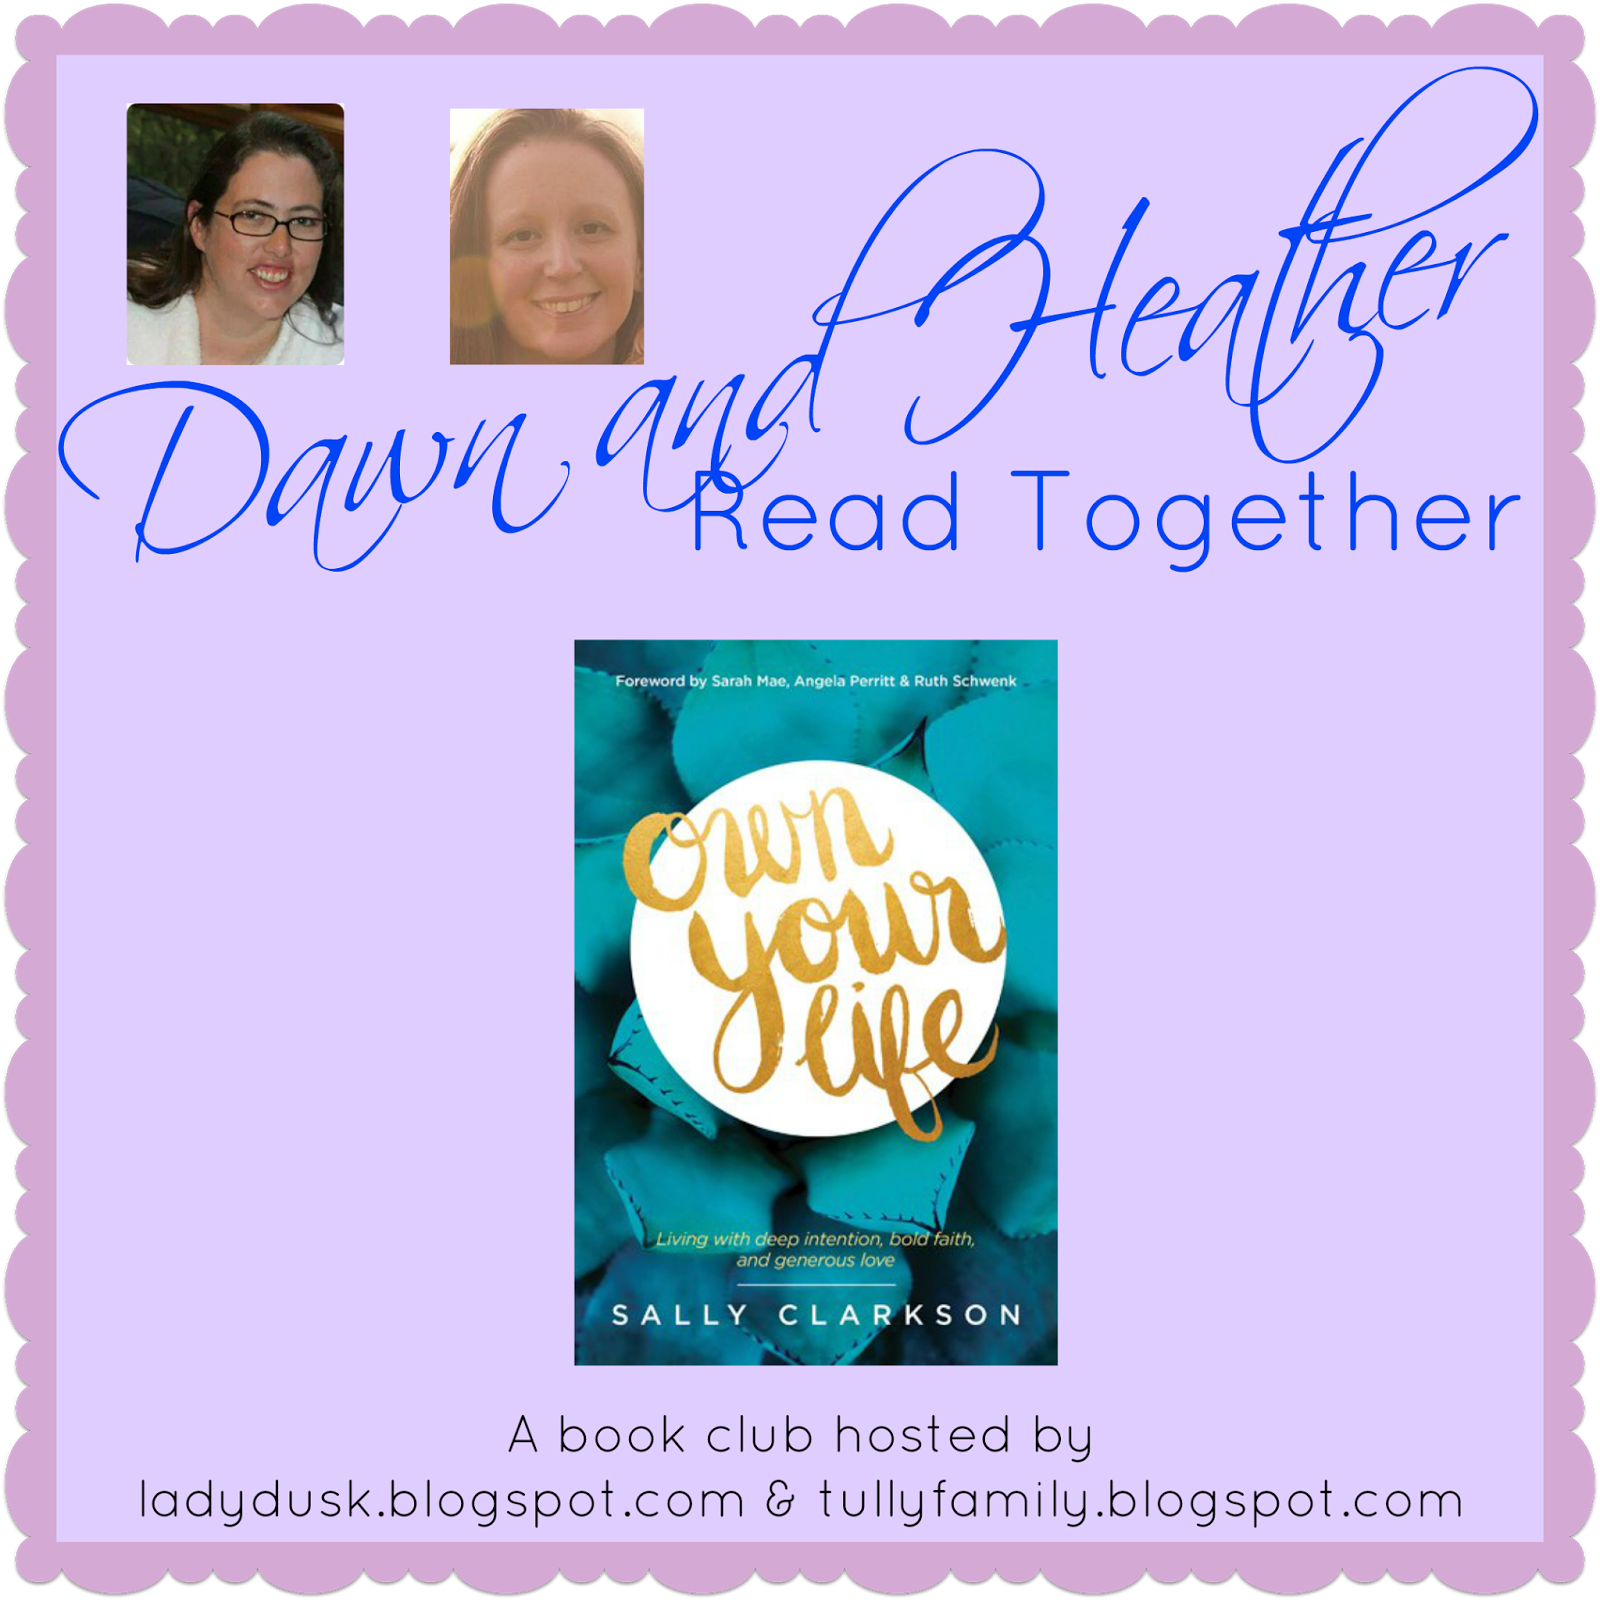 Dawn and Heather Read Together: Own Your Life, Ch 1 Heroes